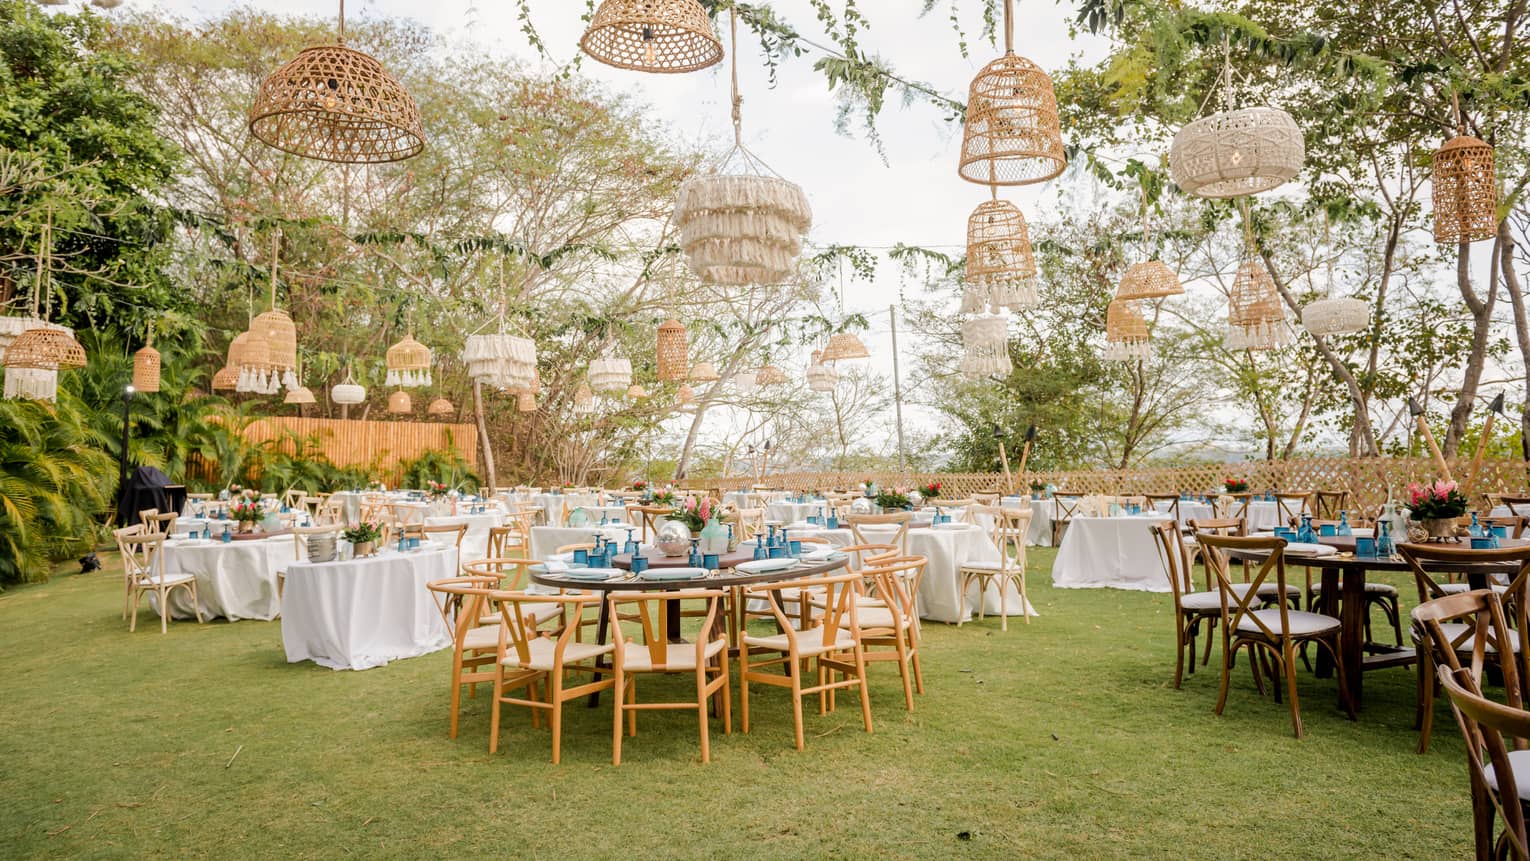 A lawn is set for an outdoor party with various round tables, white table cloths and a variety of straw light fixtures hanging from vined ropes overhead